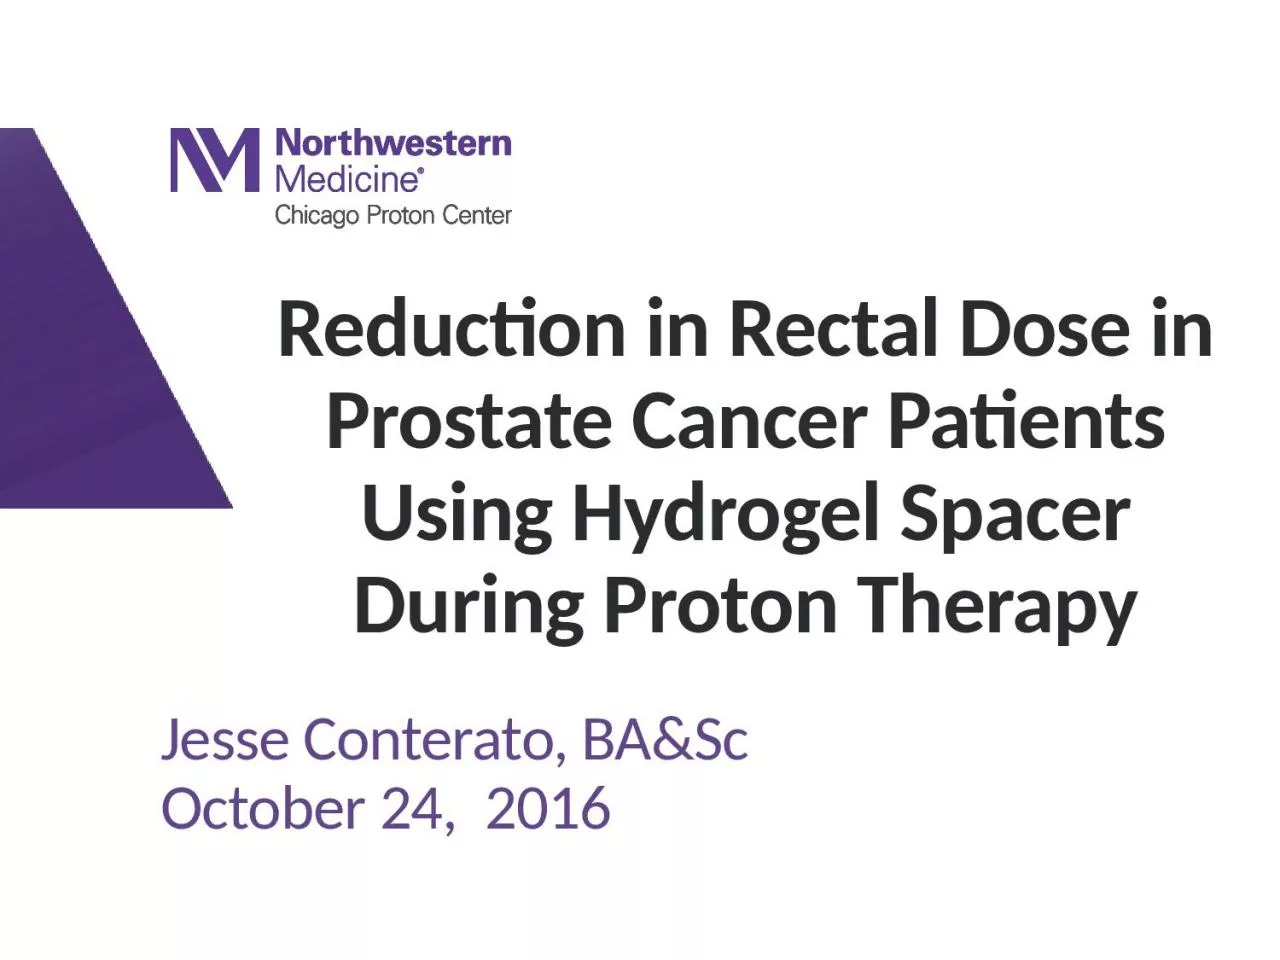 Reduction in Rectal Dose in Prostate Cancer Patients Using Hydrogel Spacer During Proton